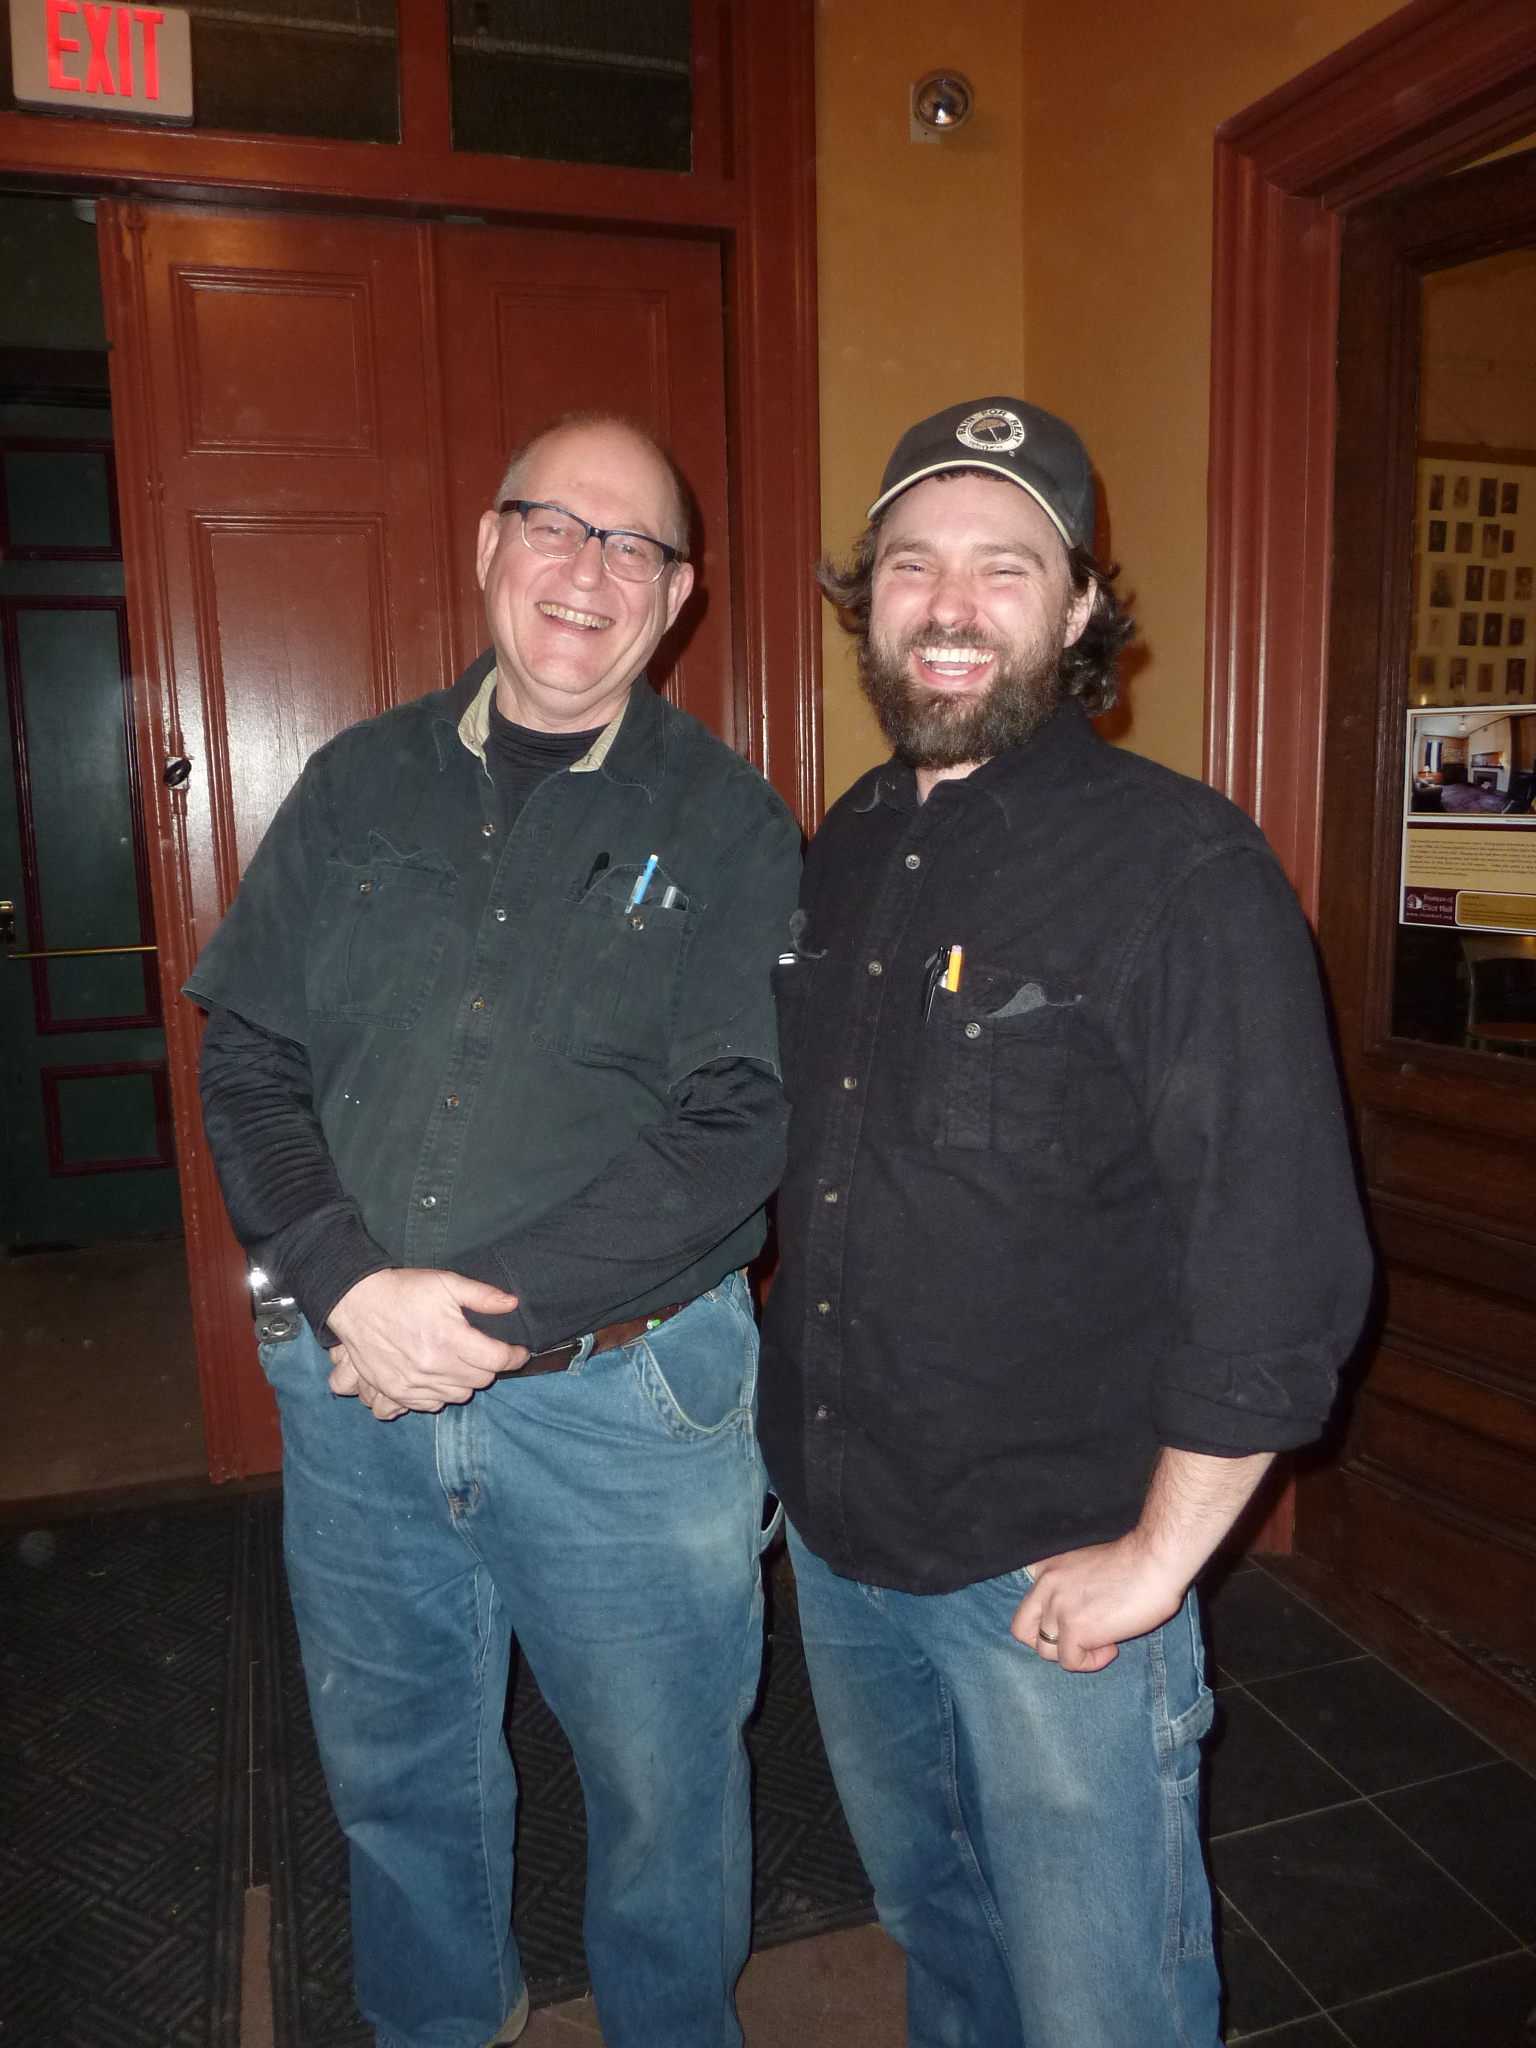 Longtime BBR member Jay Larson, left, also a member is IATSE, with Adam McClain.